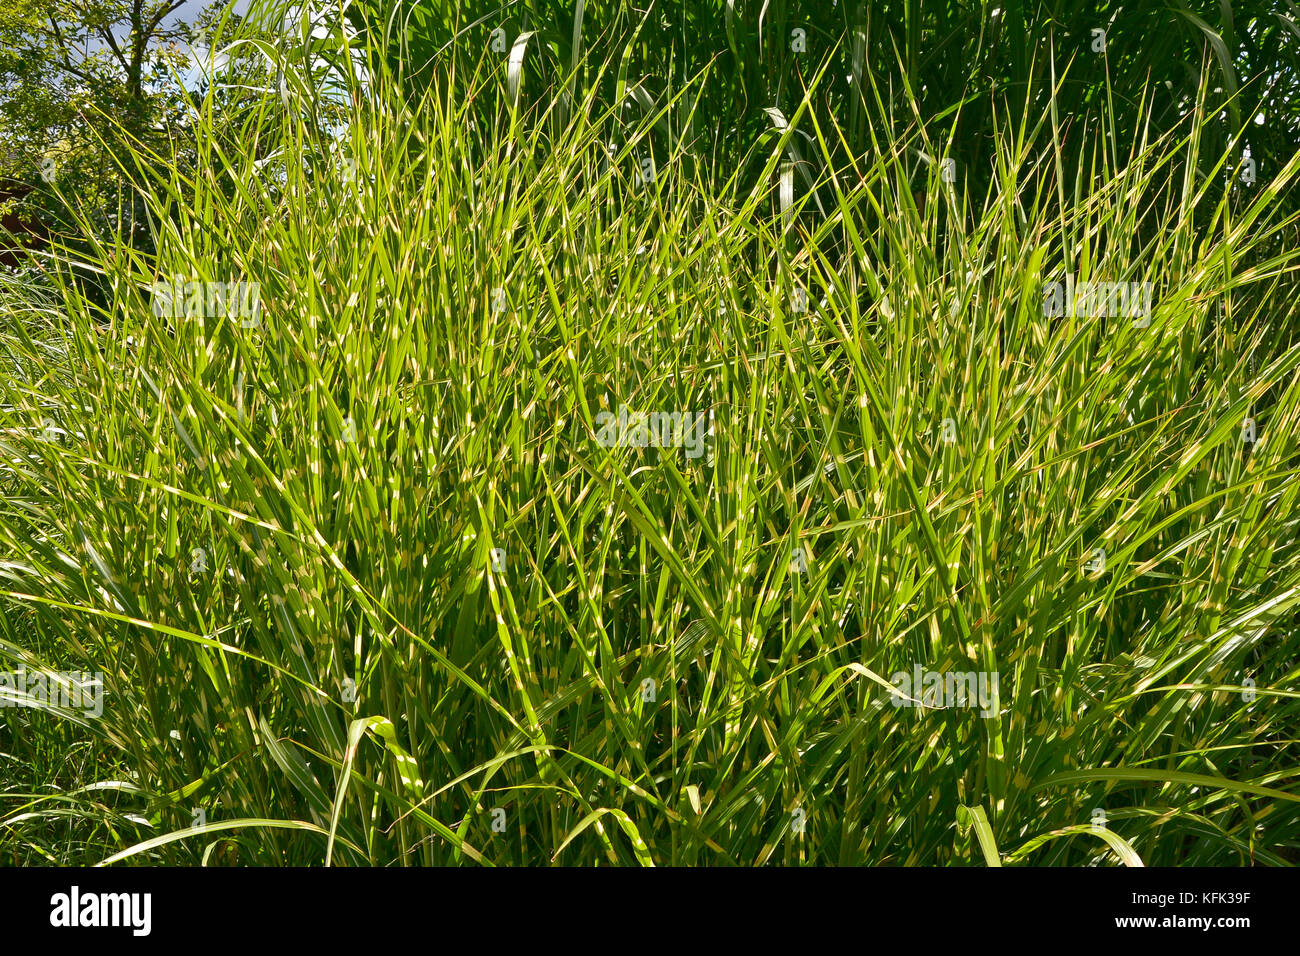 Grass Miscanthus sinensis 'Zebrinus' growing in an area of assorted grasses Stock Photo